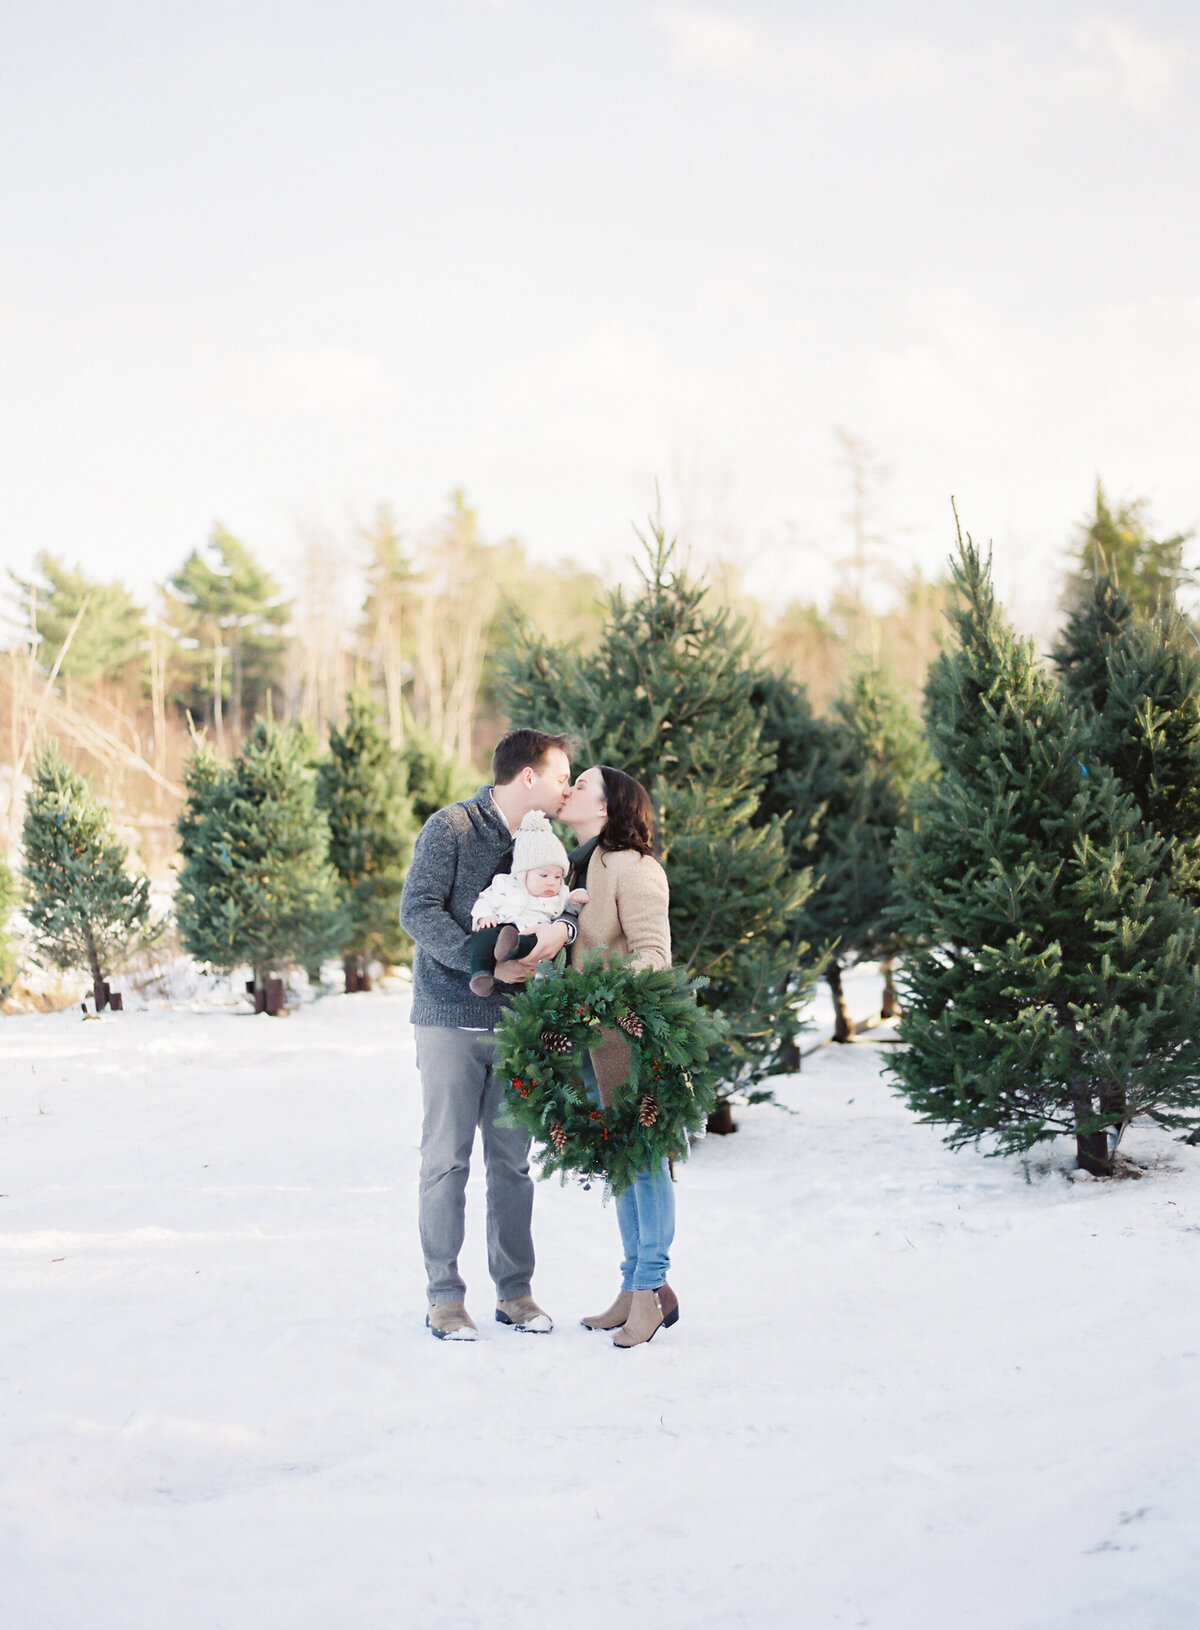 Jacqueline Anne Photography - Thistle Family-34